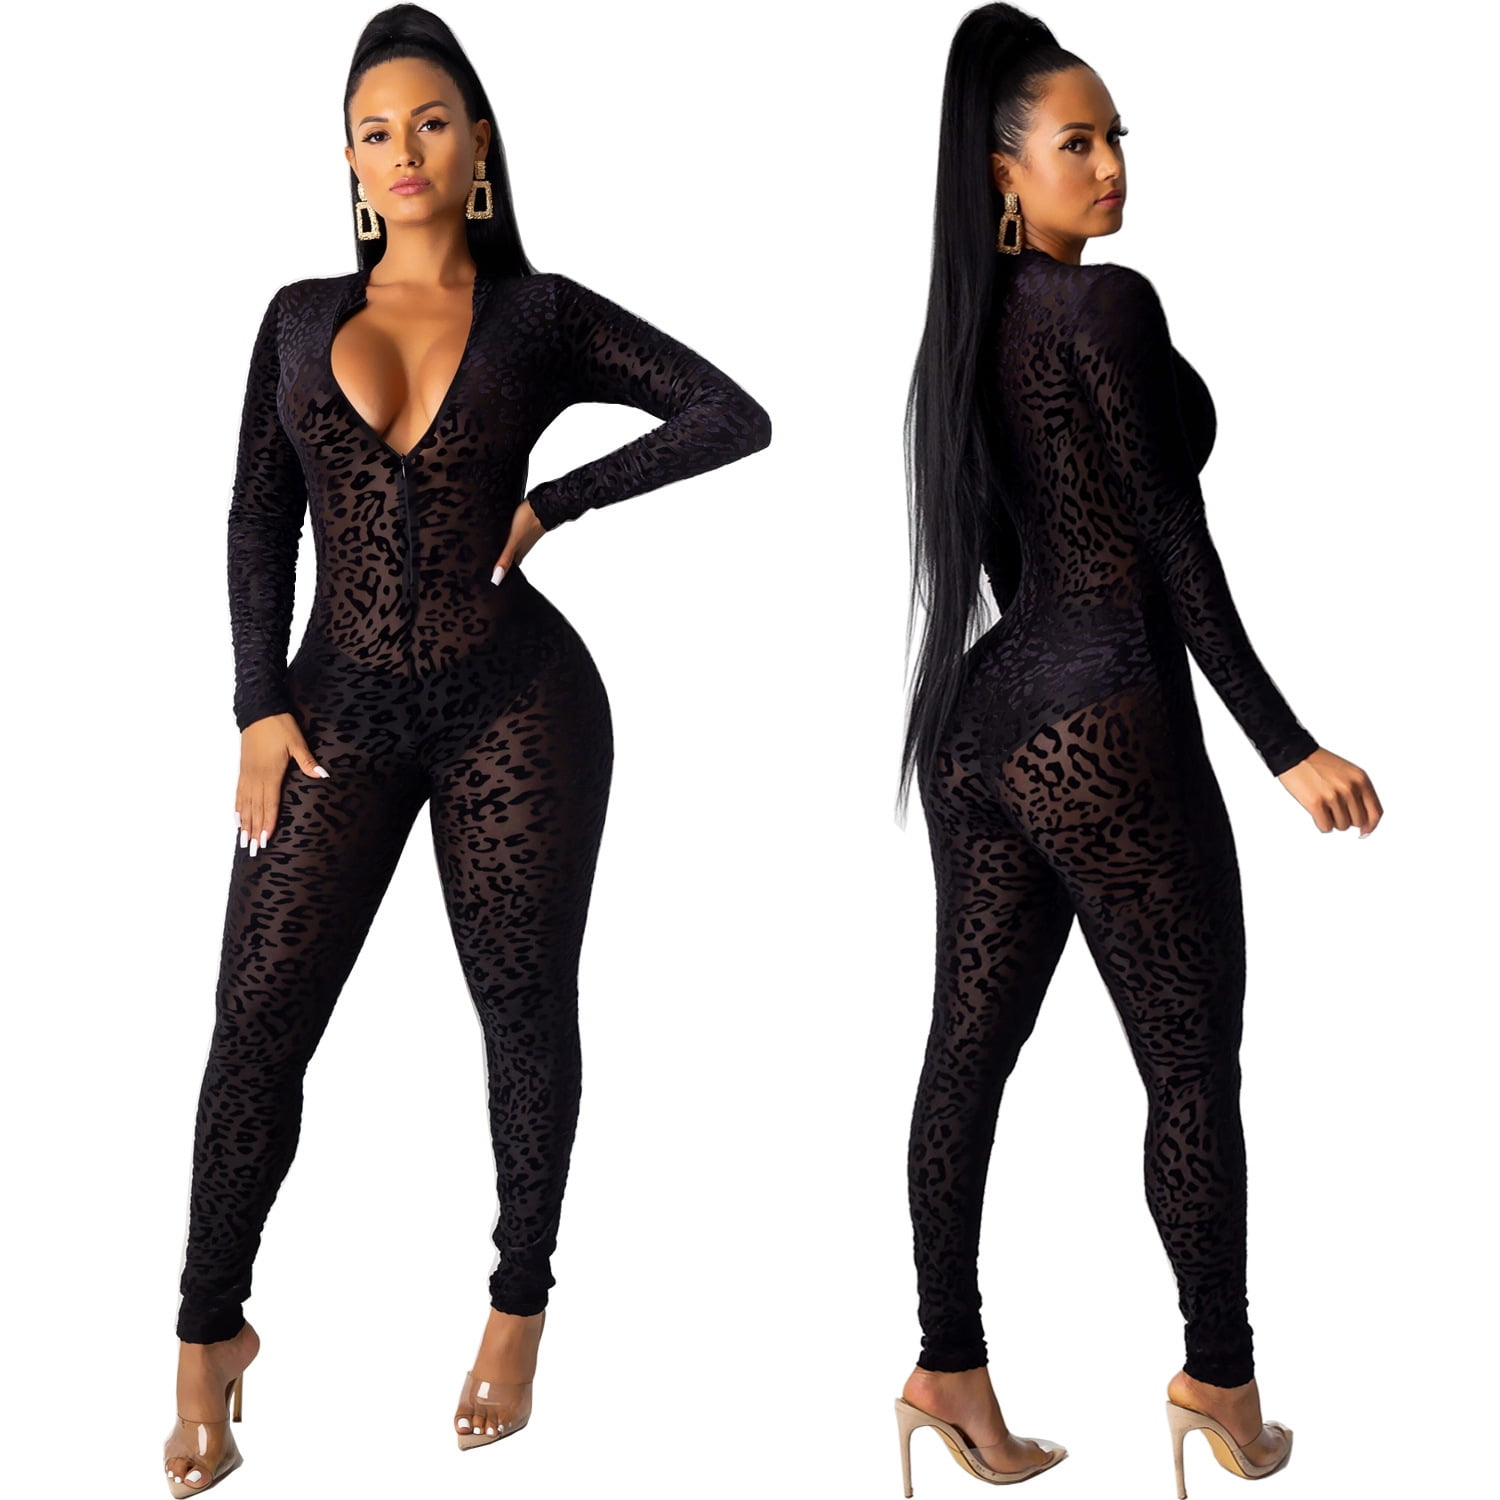 Leopard Print Hooded Floral Jumpsuits For Women For Women Long Sleeve Body  Sexy Playsuit With Shrot Pants, Slim Fit High Street Romper From Bai04,  $19.36